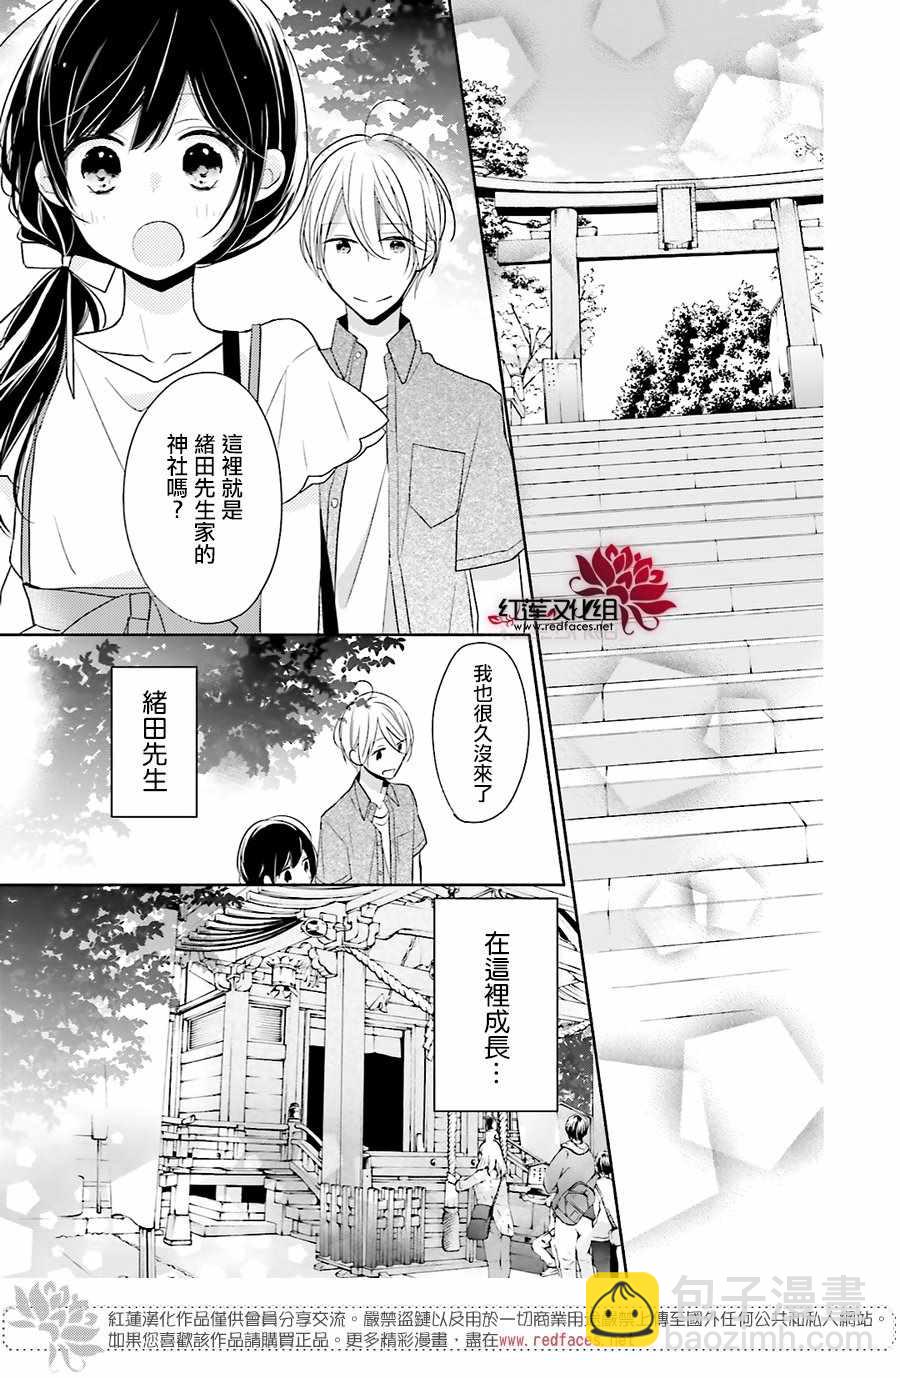 If given a second chance - 11話 - 3